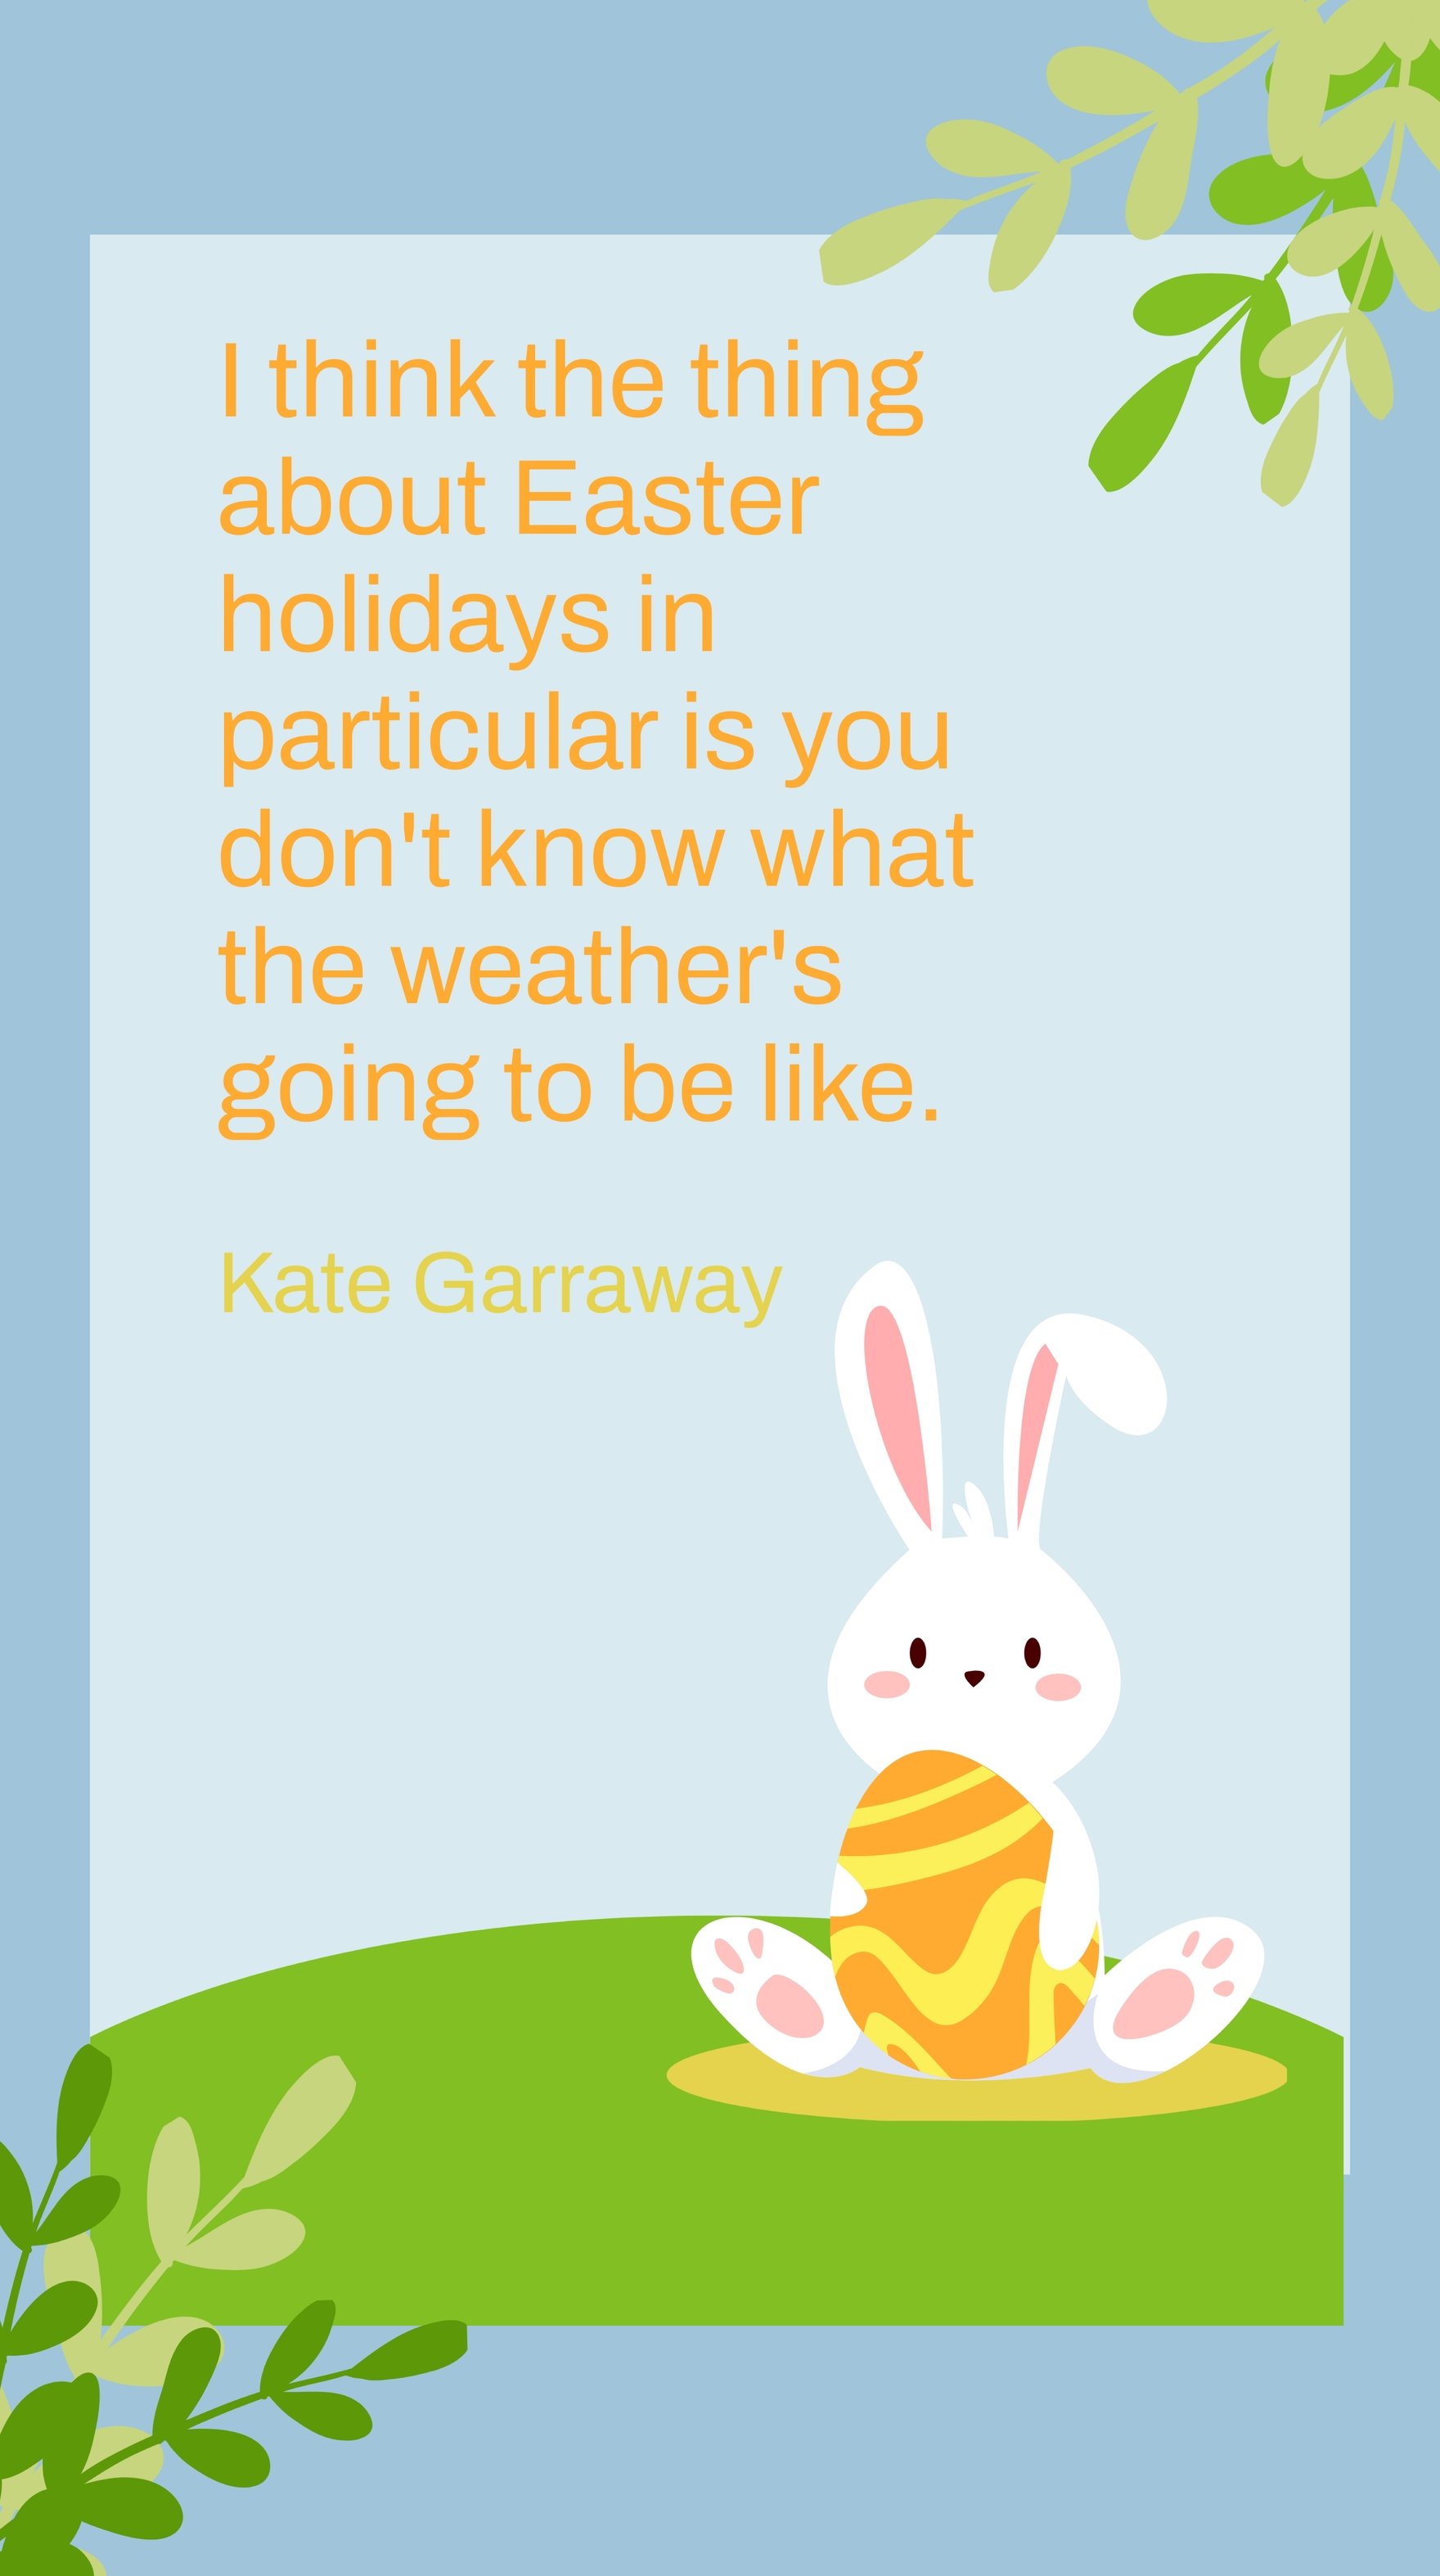 Kate Garraway - I think the thing about Easter holidays in particular is you don't know what the weather's going to be like.